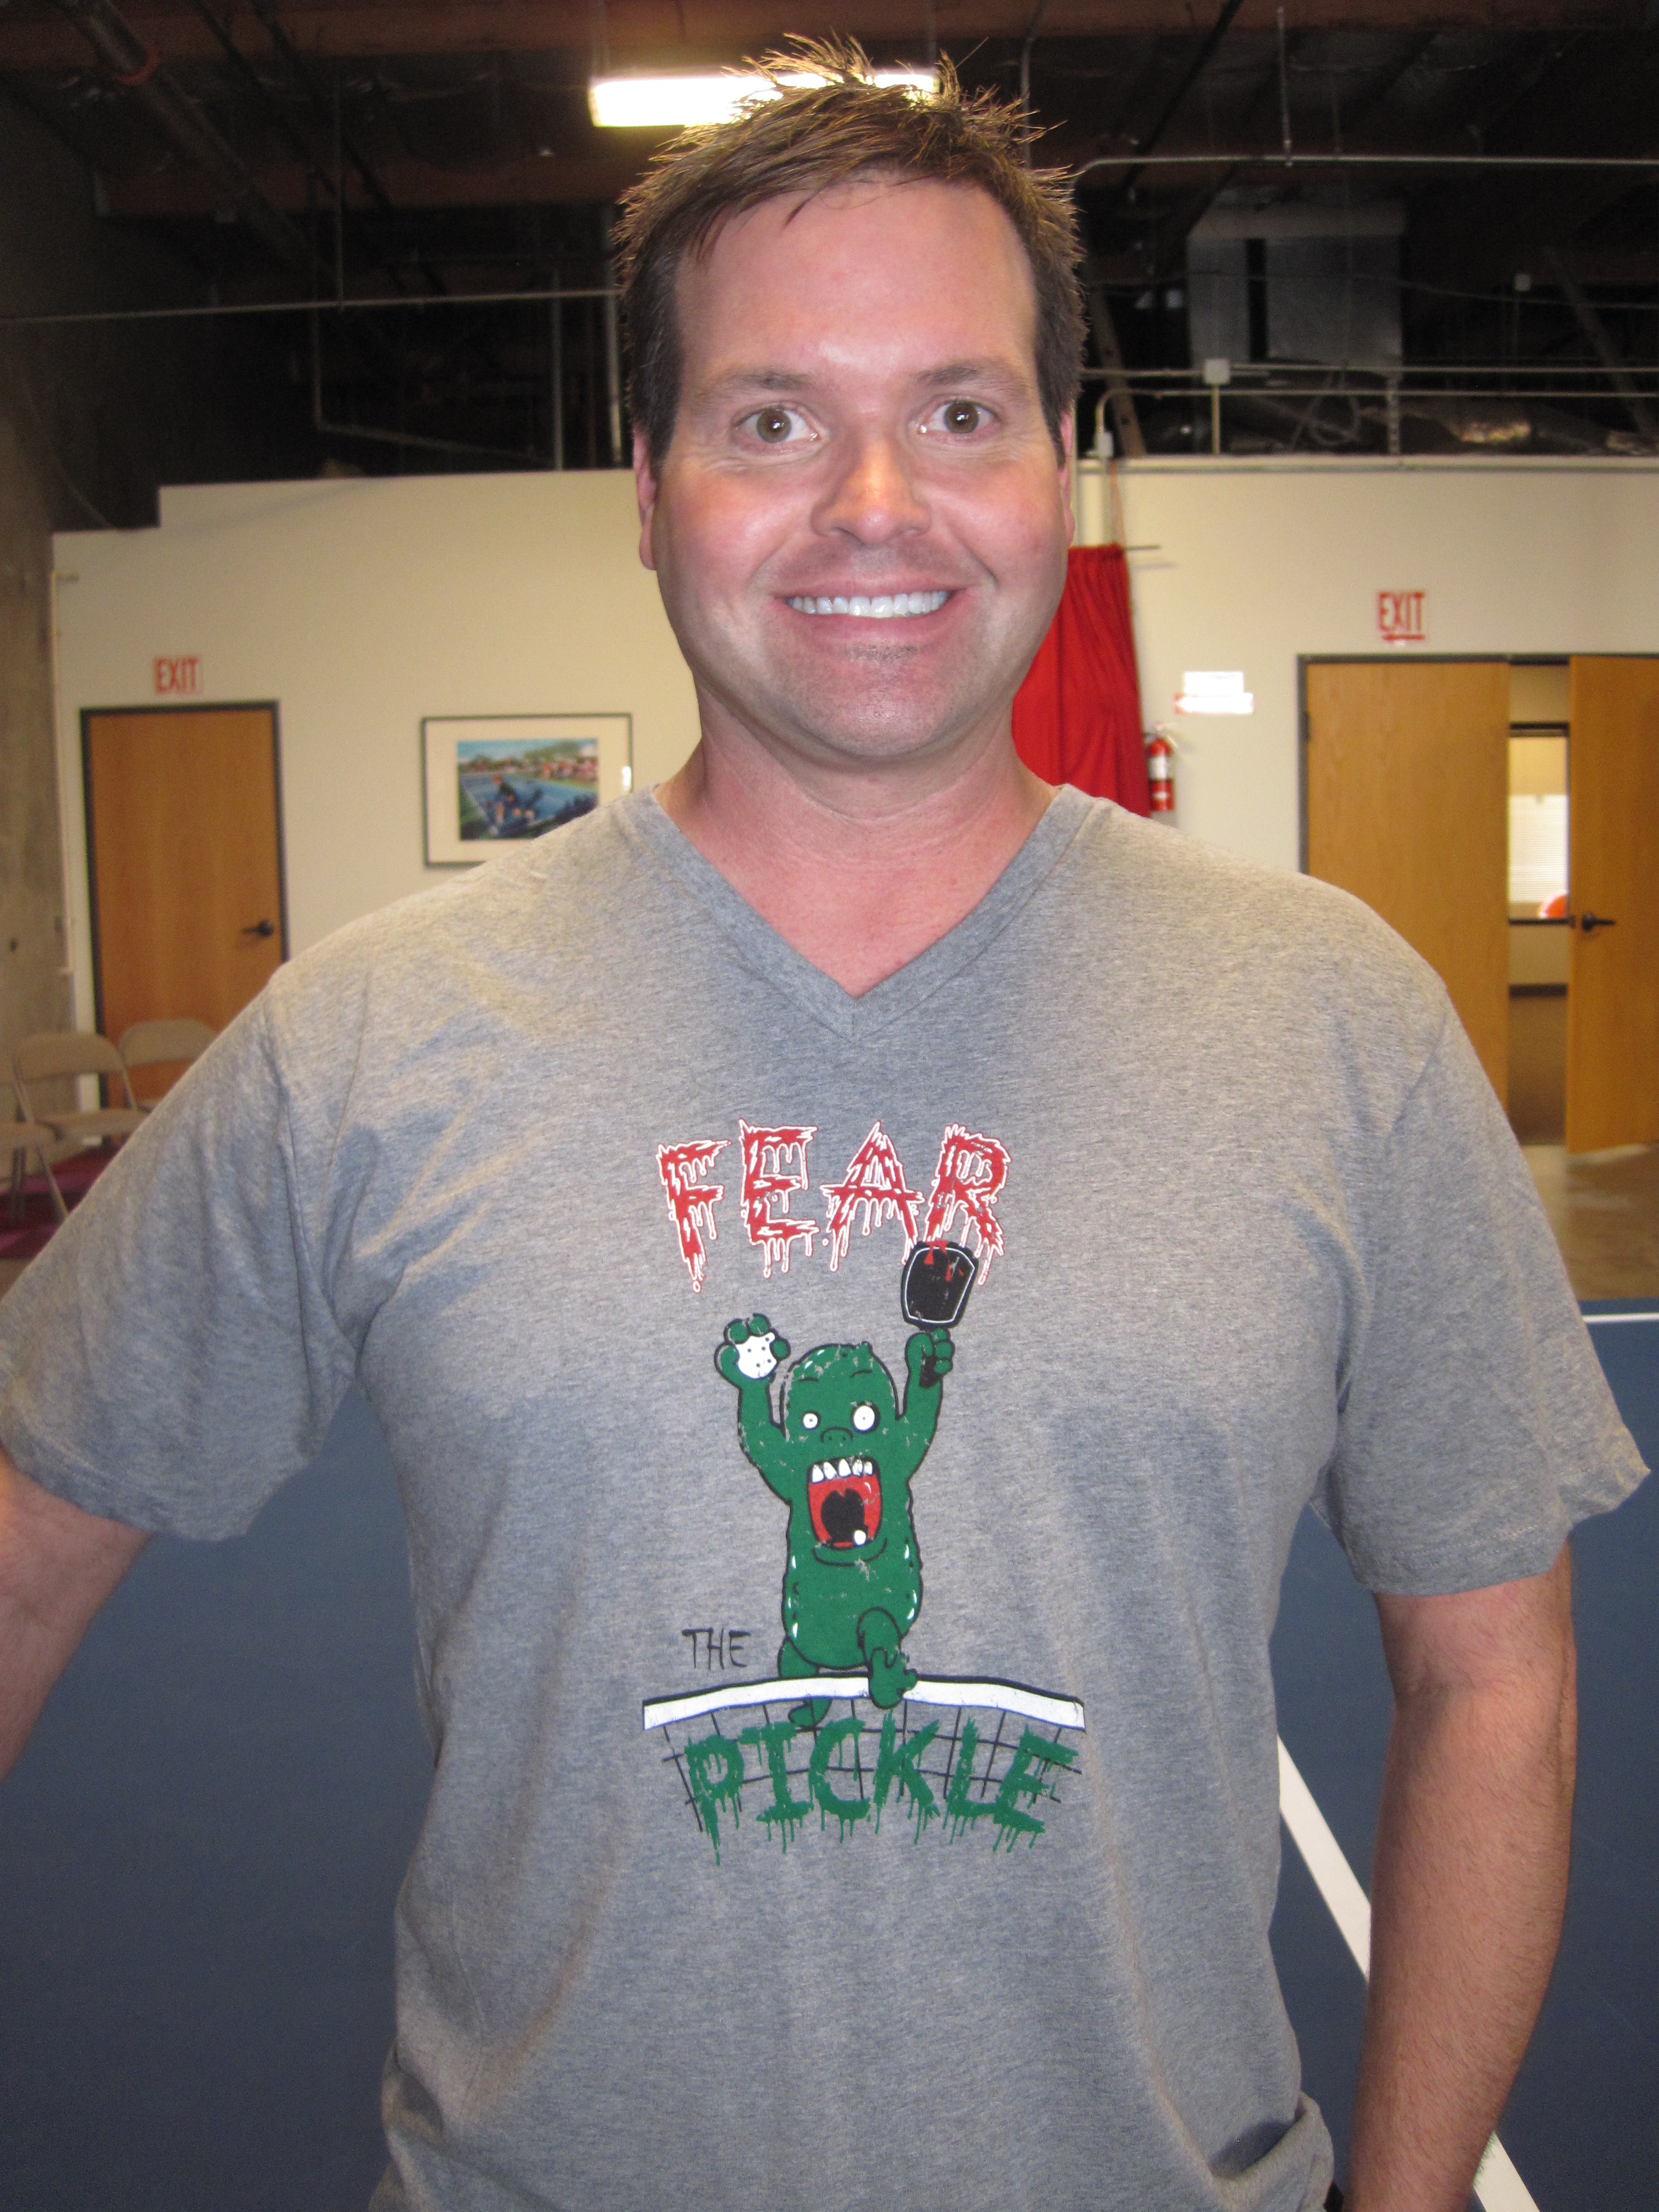 Stephen wearing the new Fear the Pickle shirt